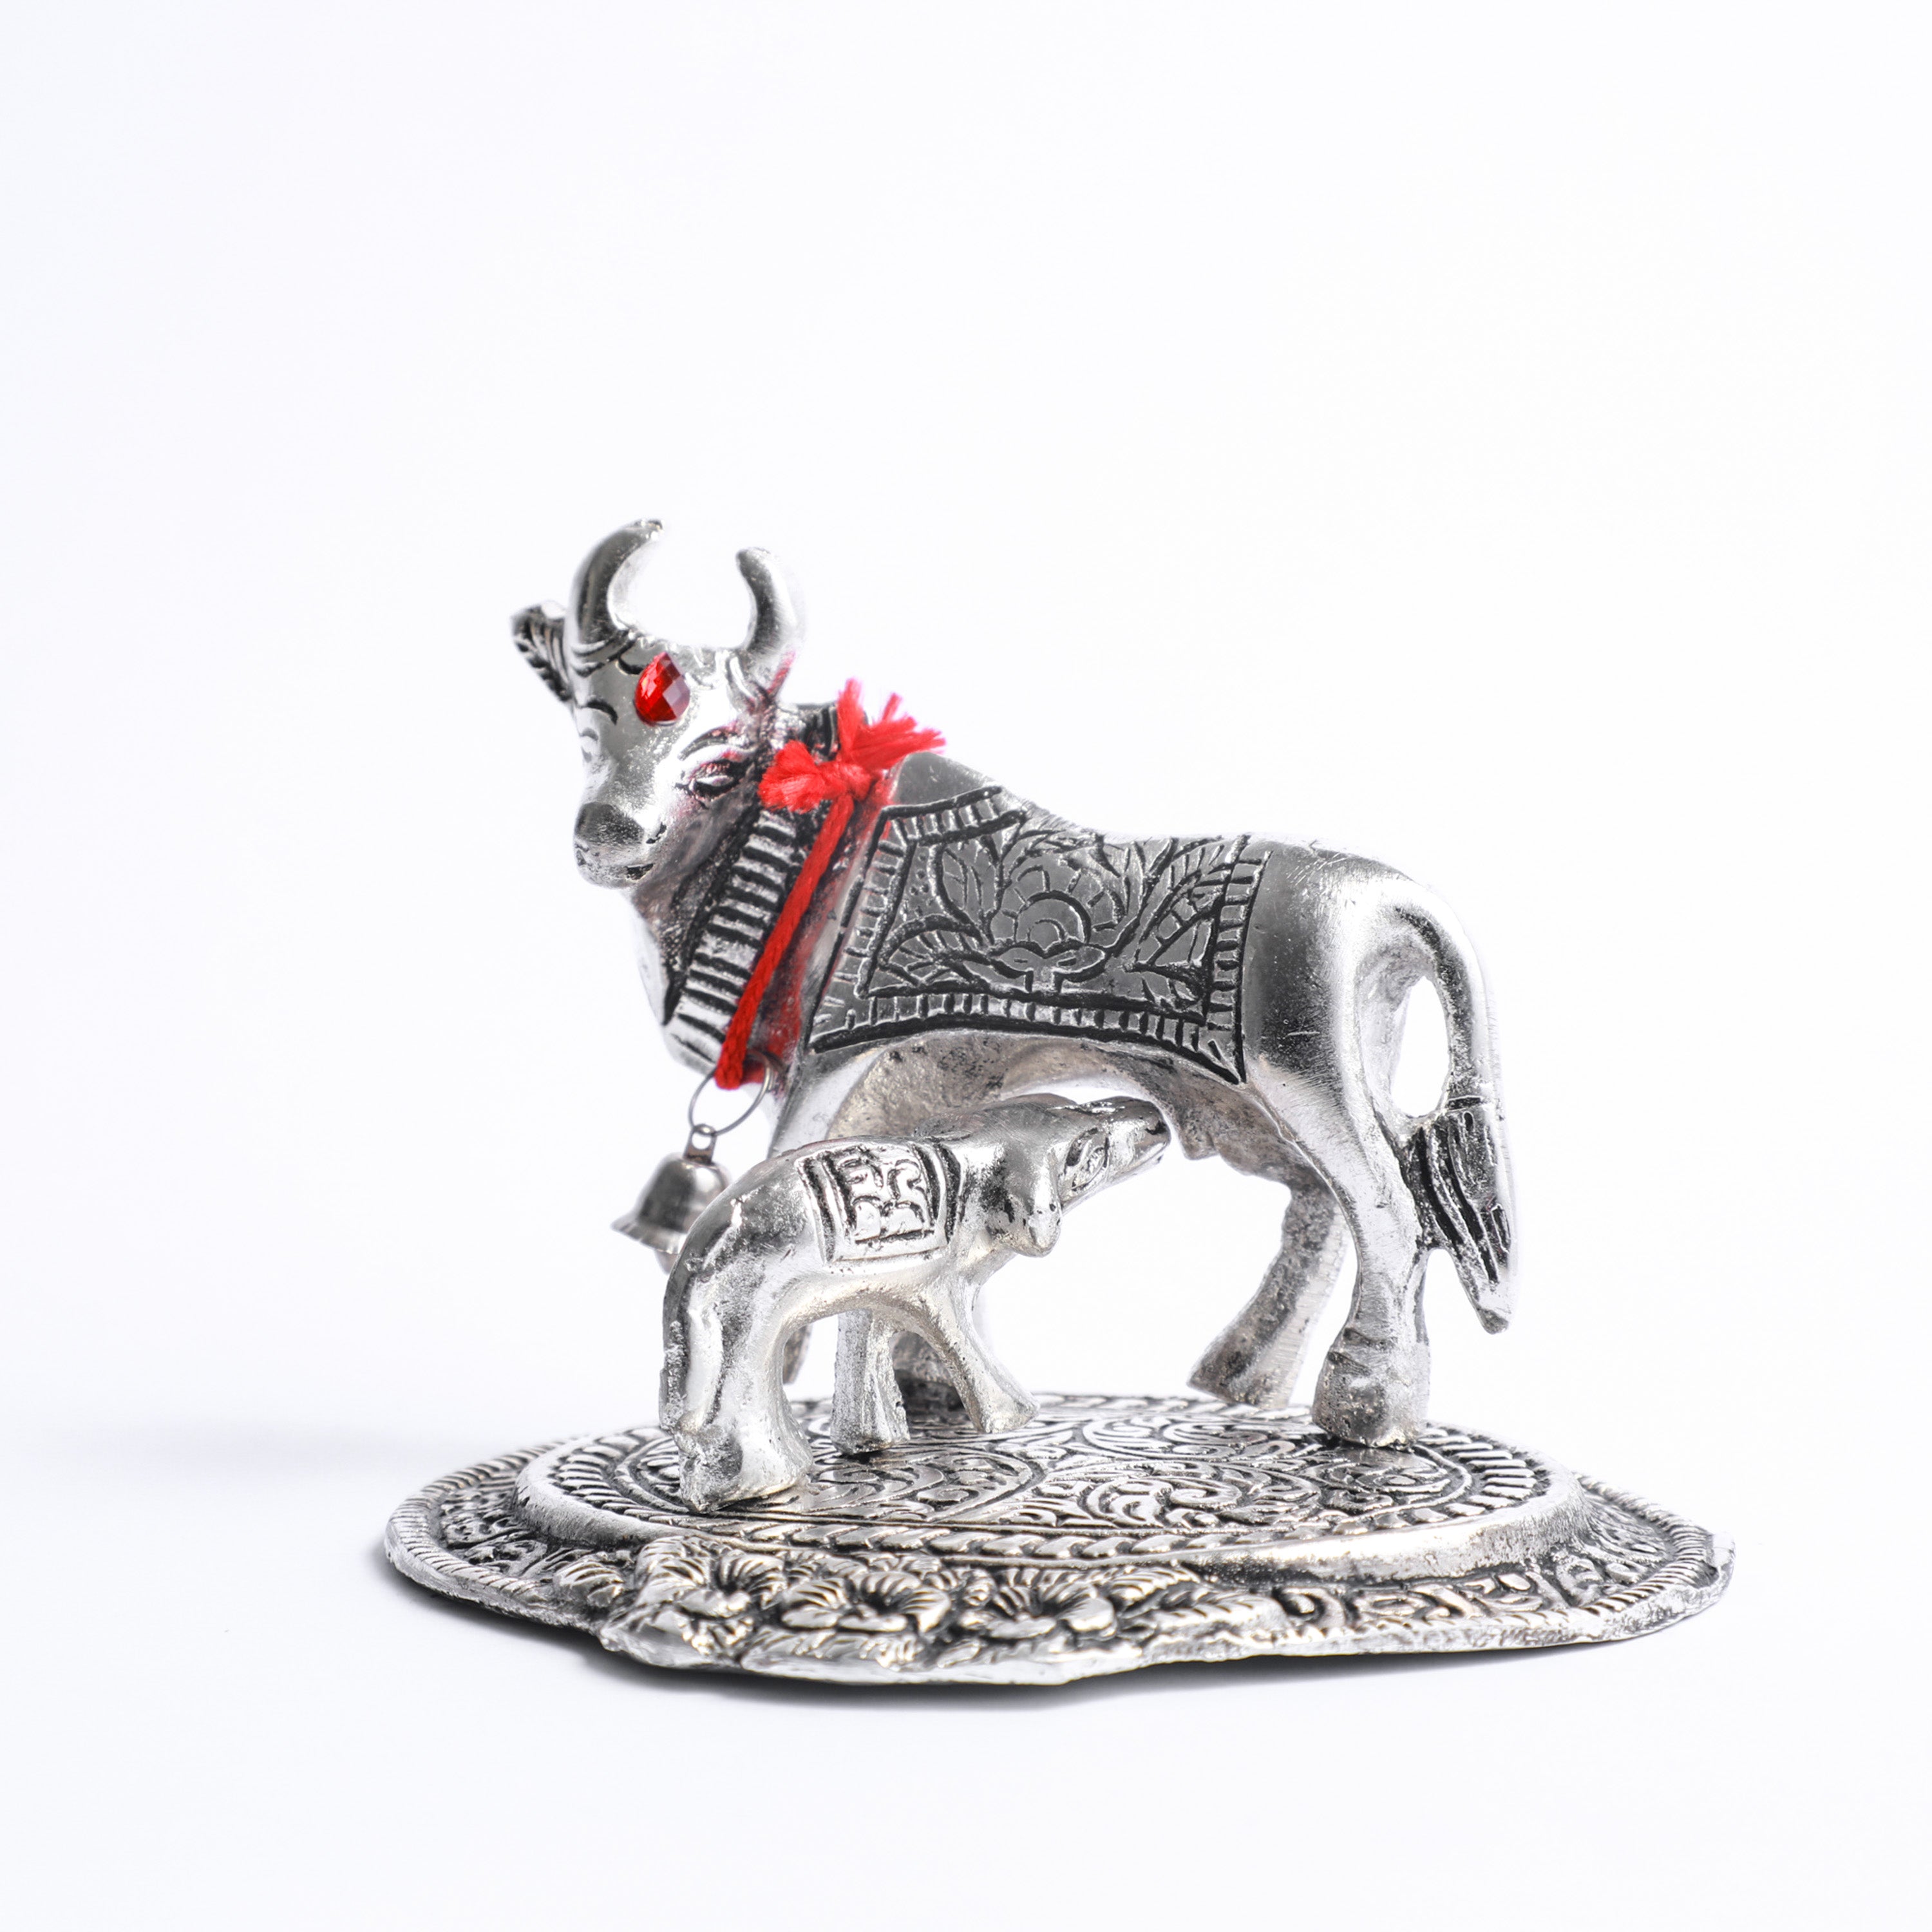 Metal Cow and Calf Figurine for Indian traditional gifting ideas